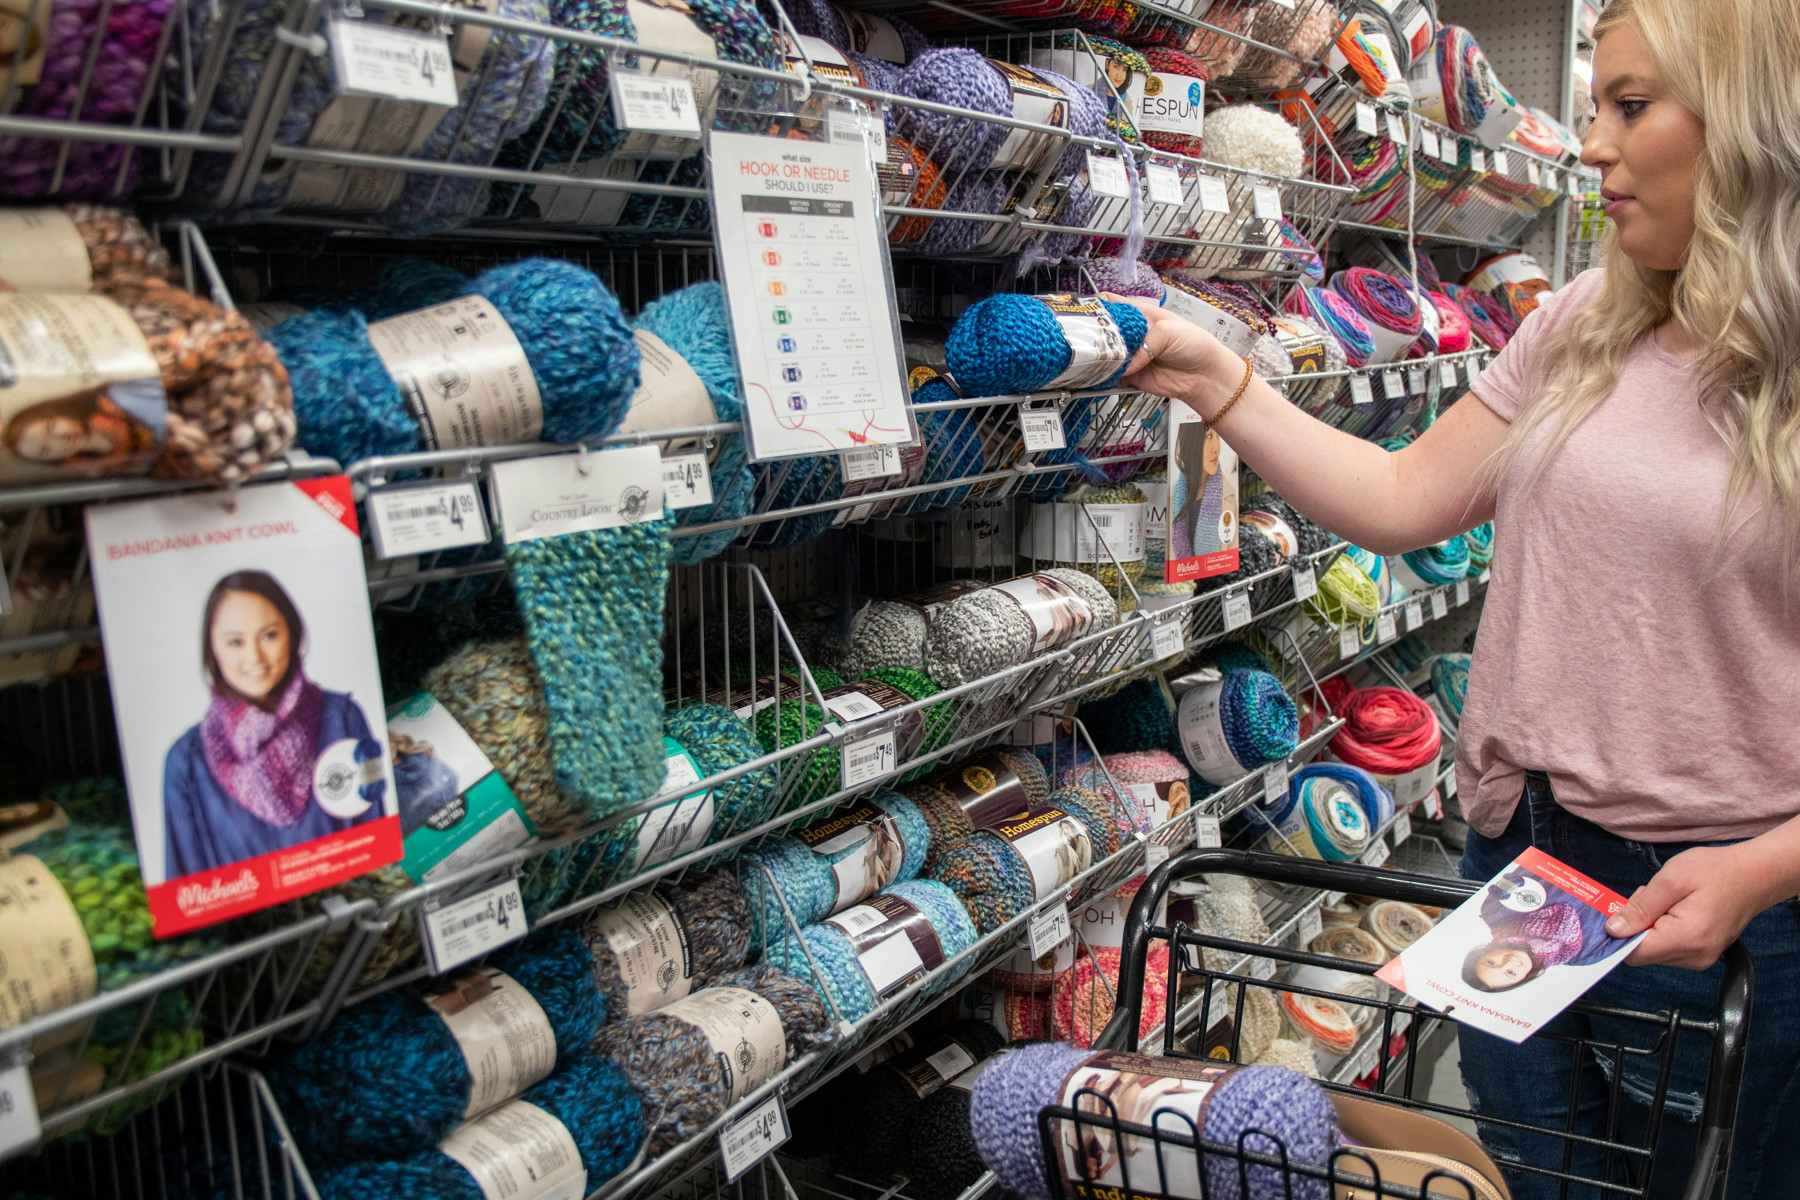 Get free crochet and knitting patterns from Michaels.